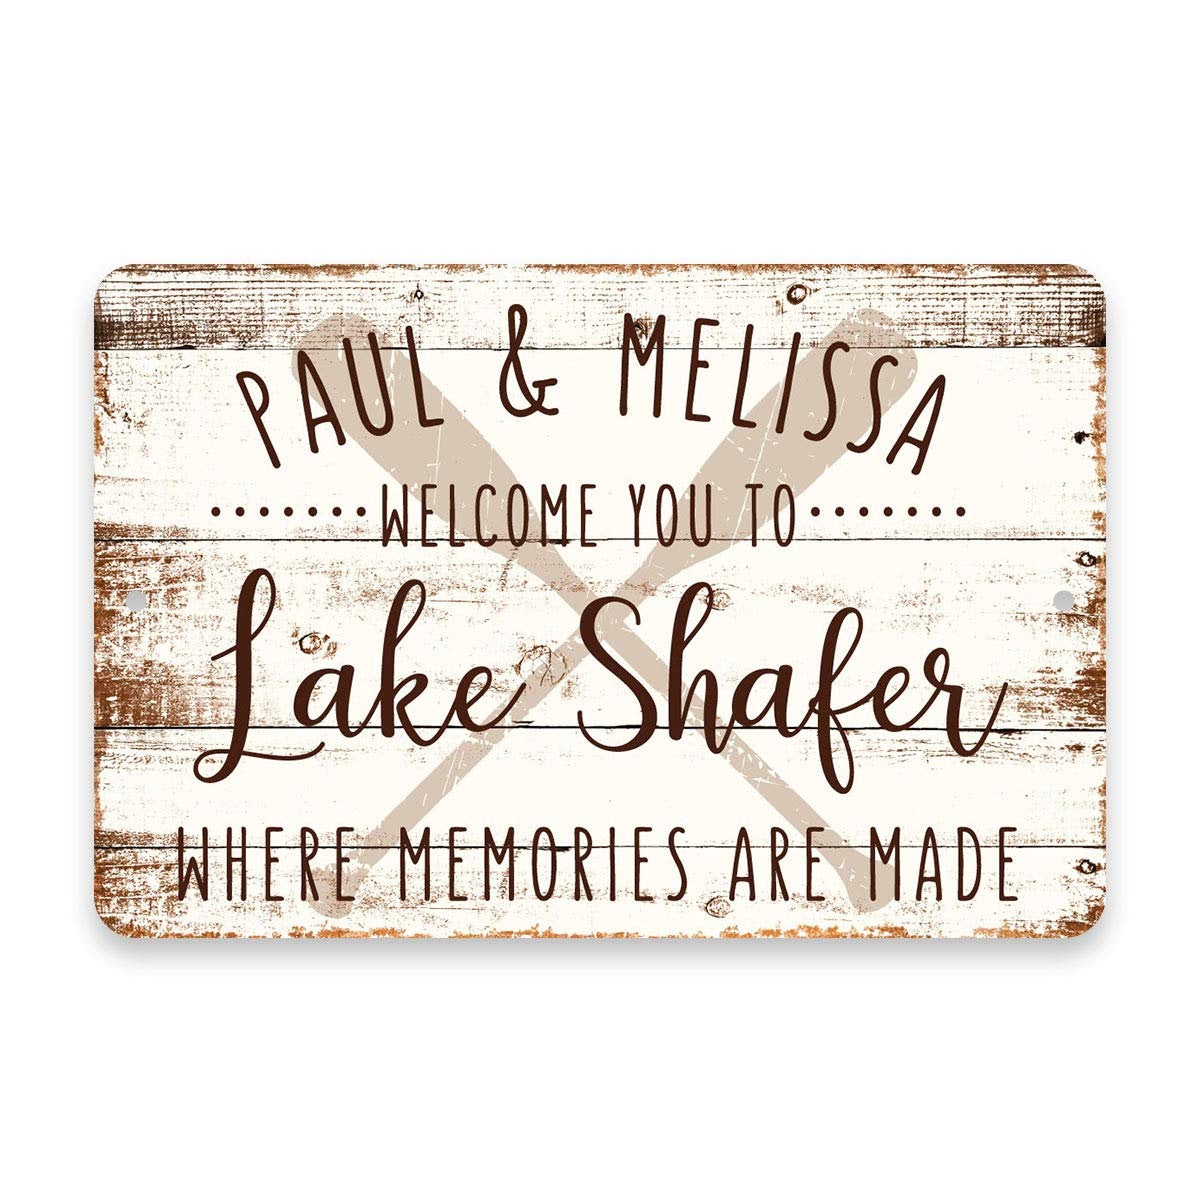 Personalized Welcome to Lake Shafer Where Memories are Made Sign - 8 X 12 Metal Sign with Wood Look